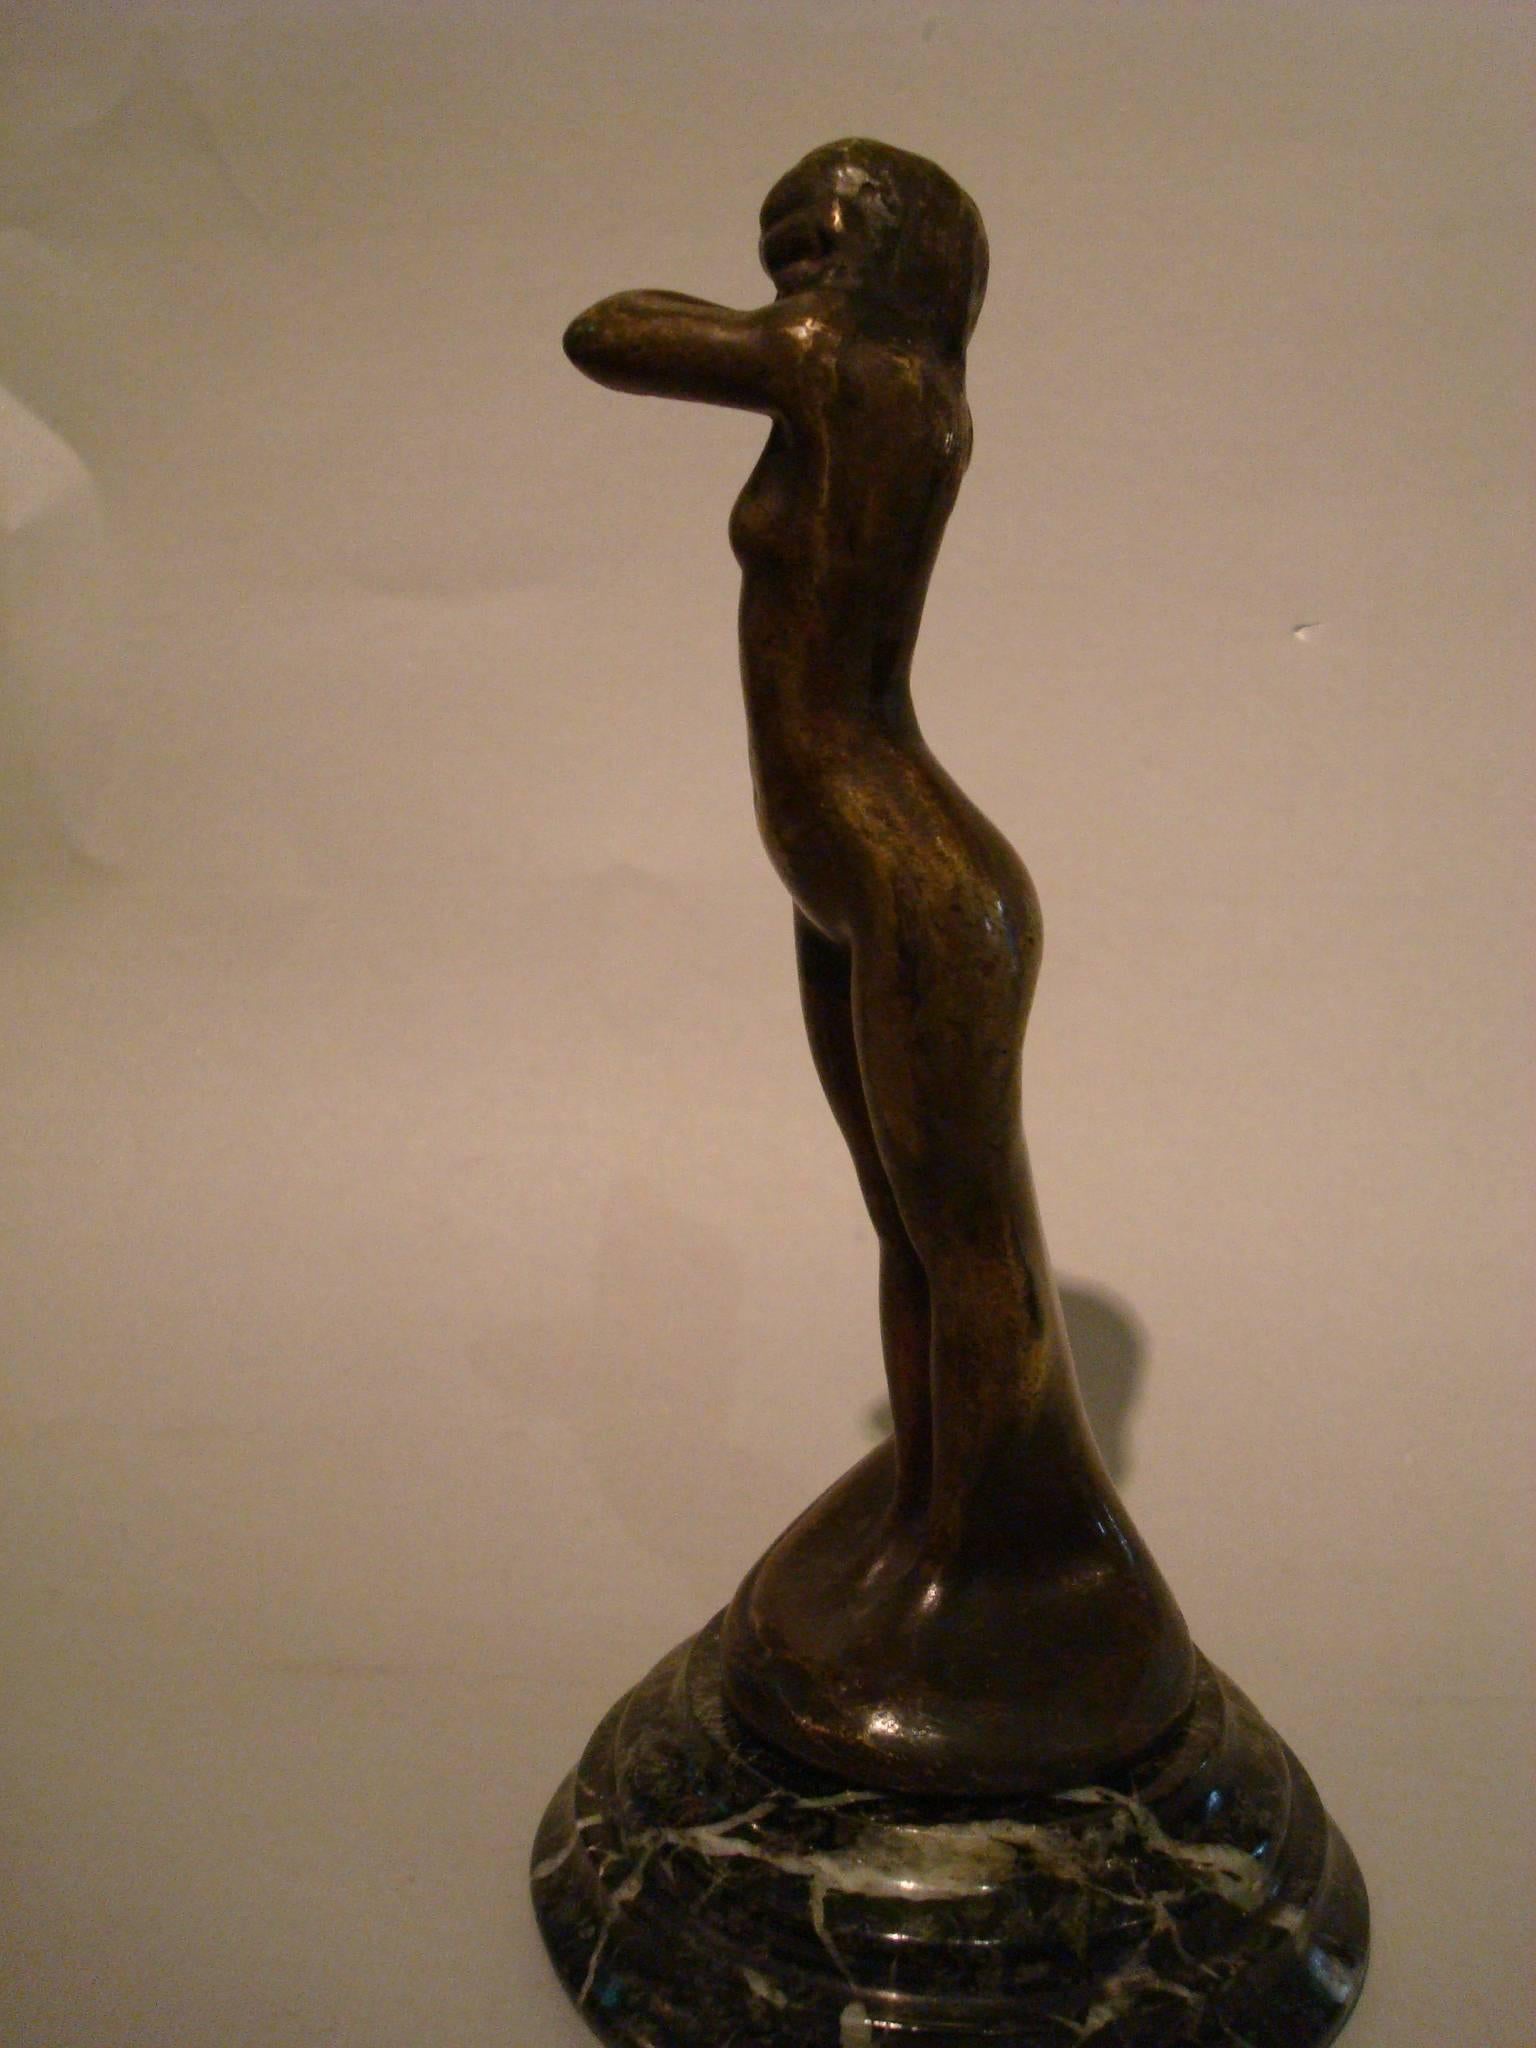 Lovely Art Deco shy naked women made of bronze and mounted over a green marble base. It is signed L. Betti and foundry Etling Paris. Perfect piece of Automobilia - paperweight - car mascot - hood ornament. Figure measures 15.5 cm high plus the base.